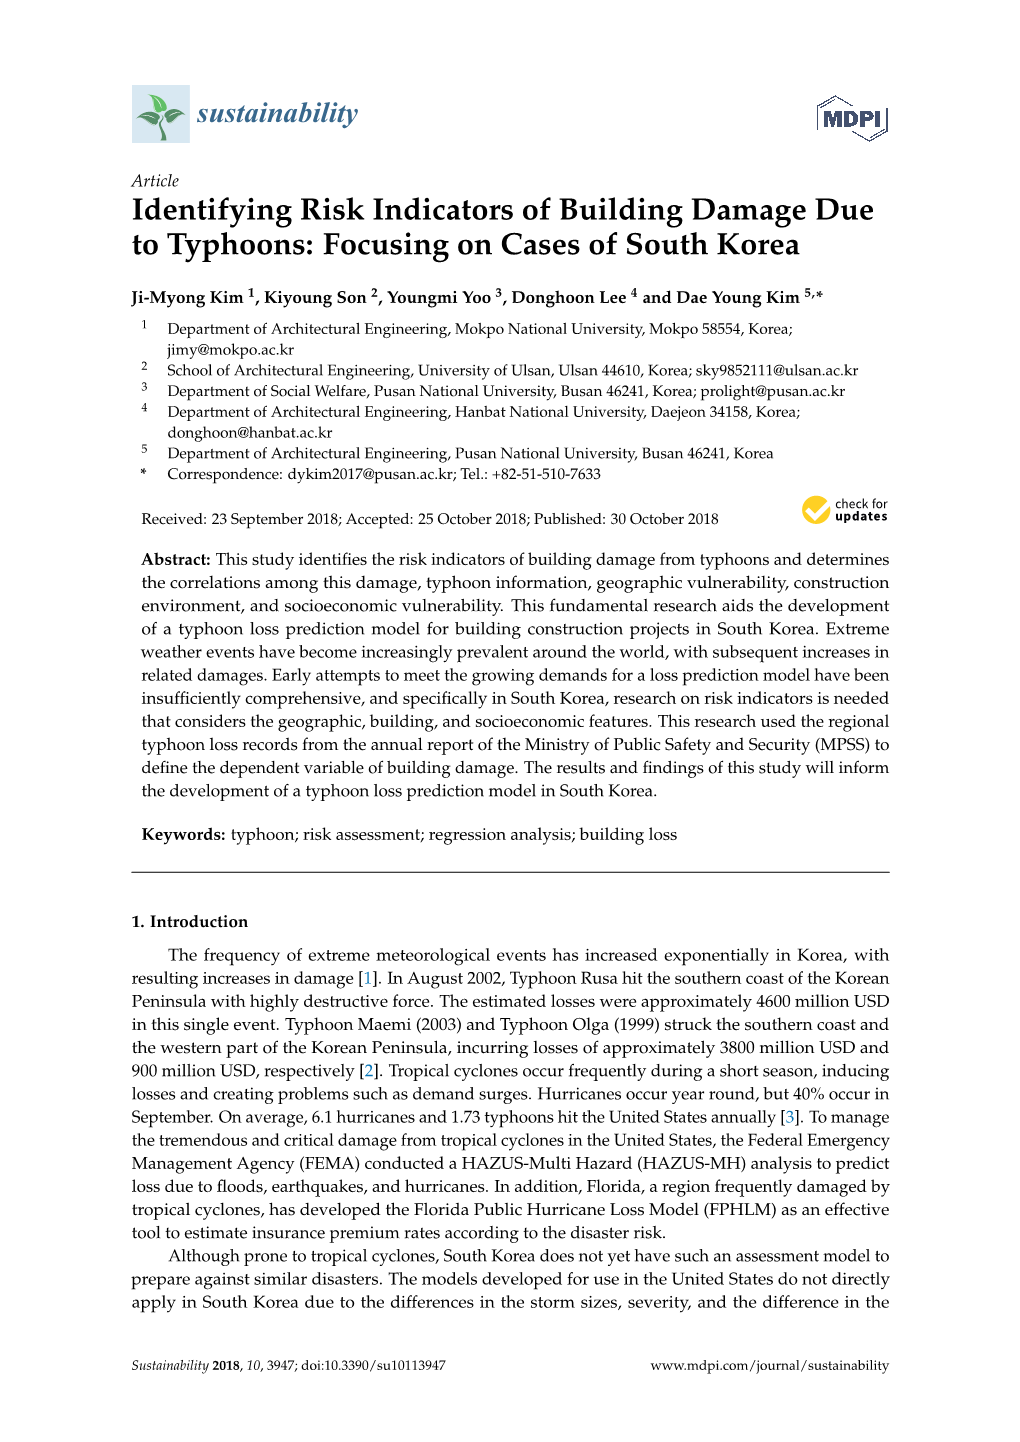 Identifying Risk Indicators of Building Damage Due to Typhoons: Focusing on Cases of South Korea